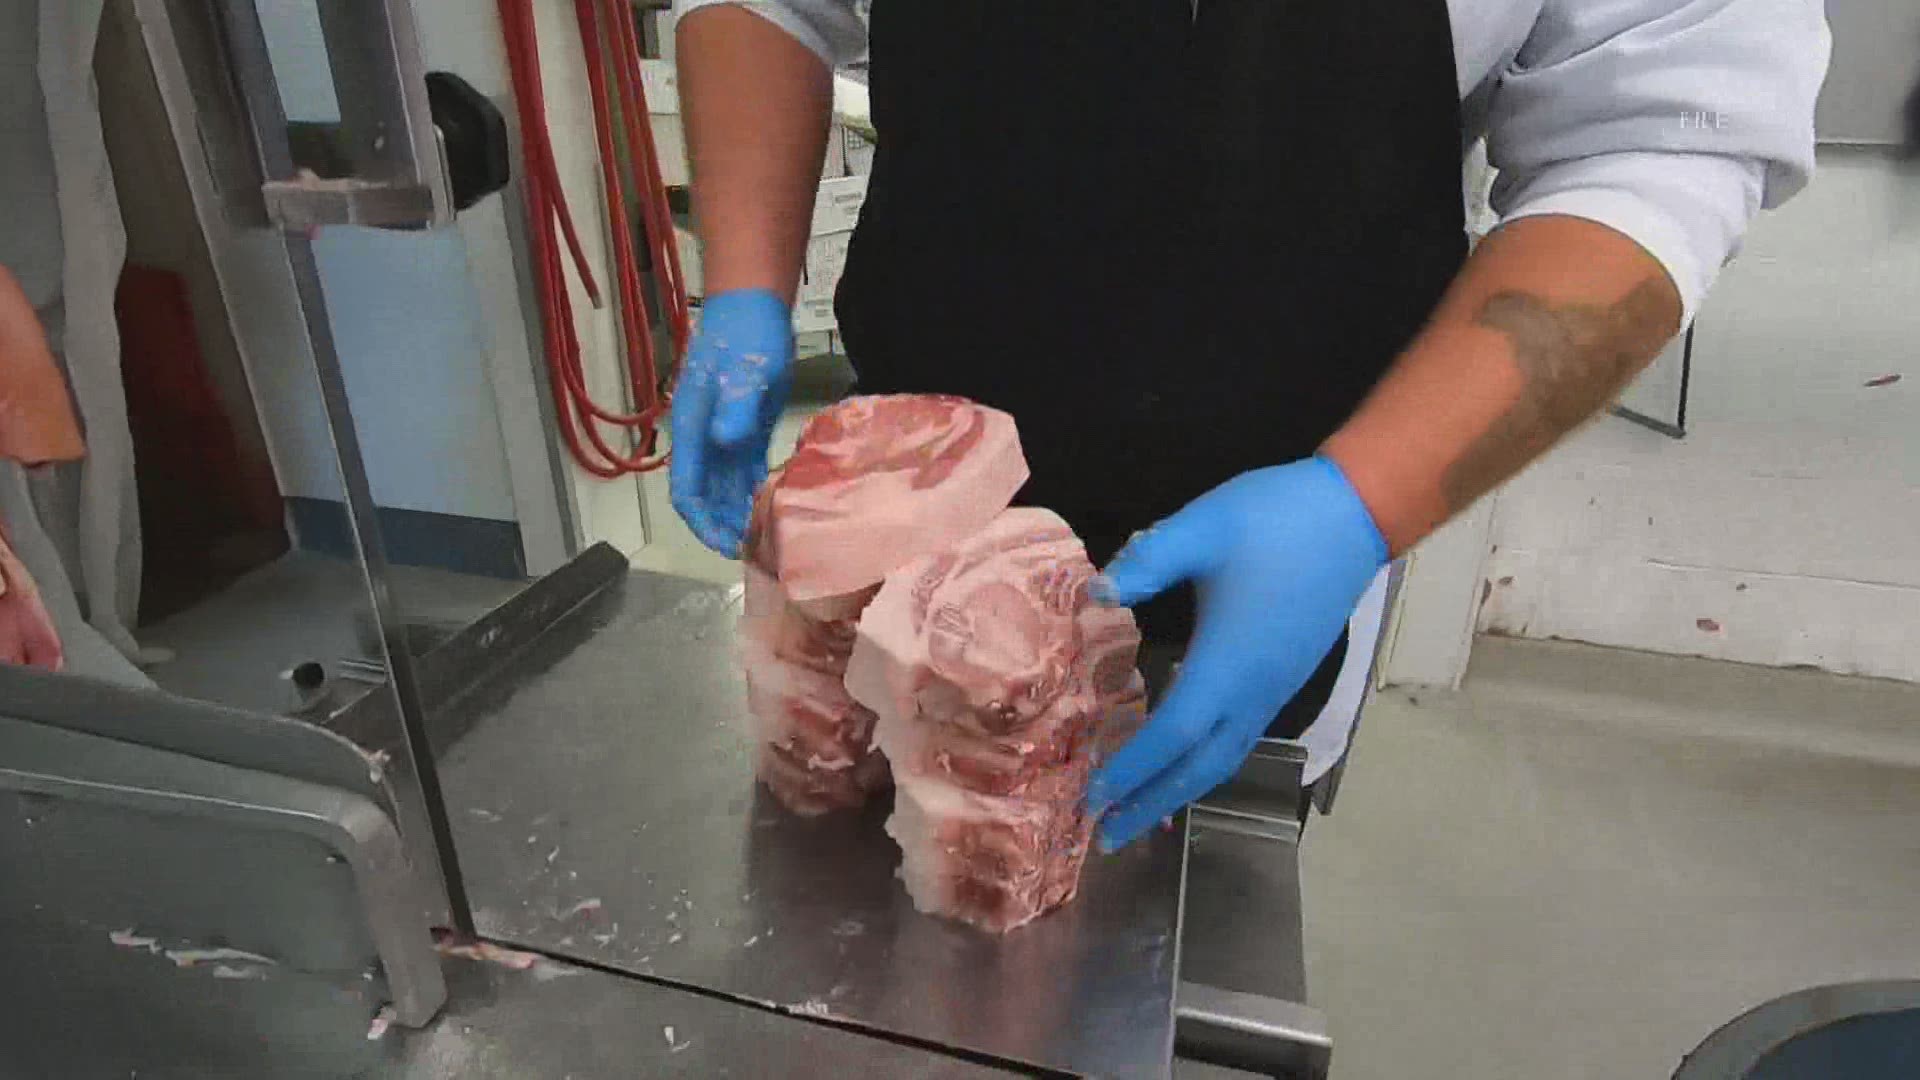 Maine Congresswoman Chellie Pingree joined with Republican Congressman Jeff Fortenberry to create a bill that would help local meat facilities expand.